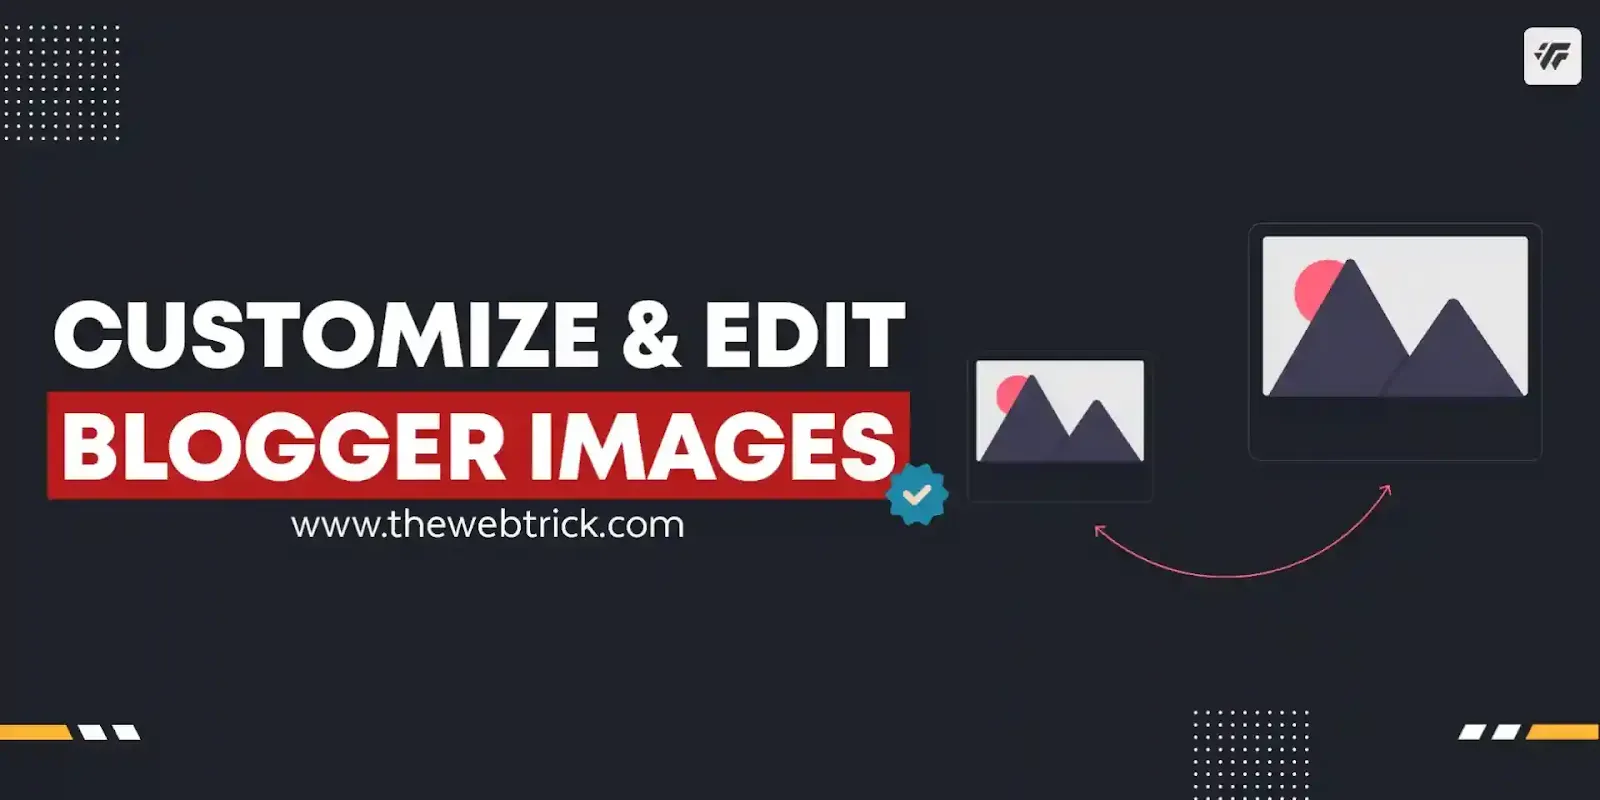 How to Customize and Edit Blogger Images